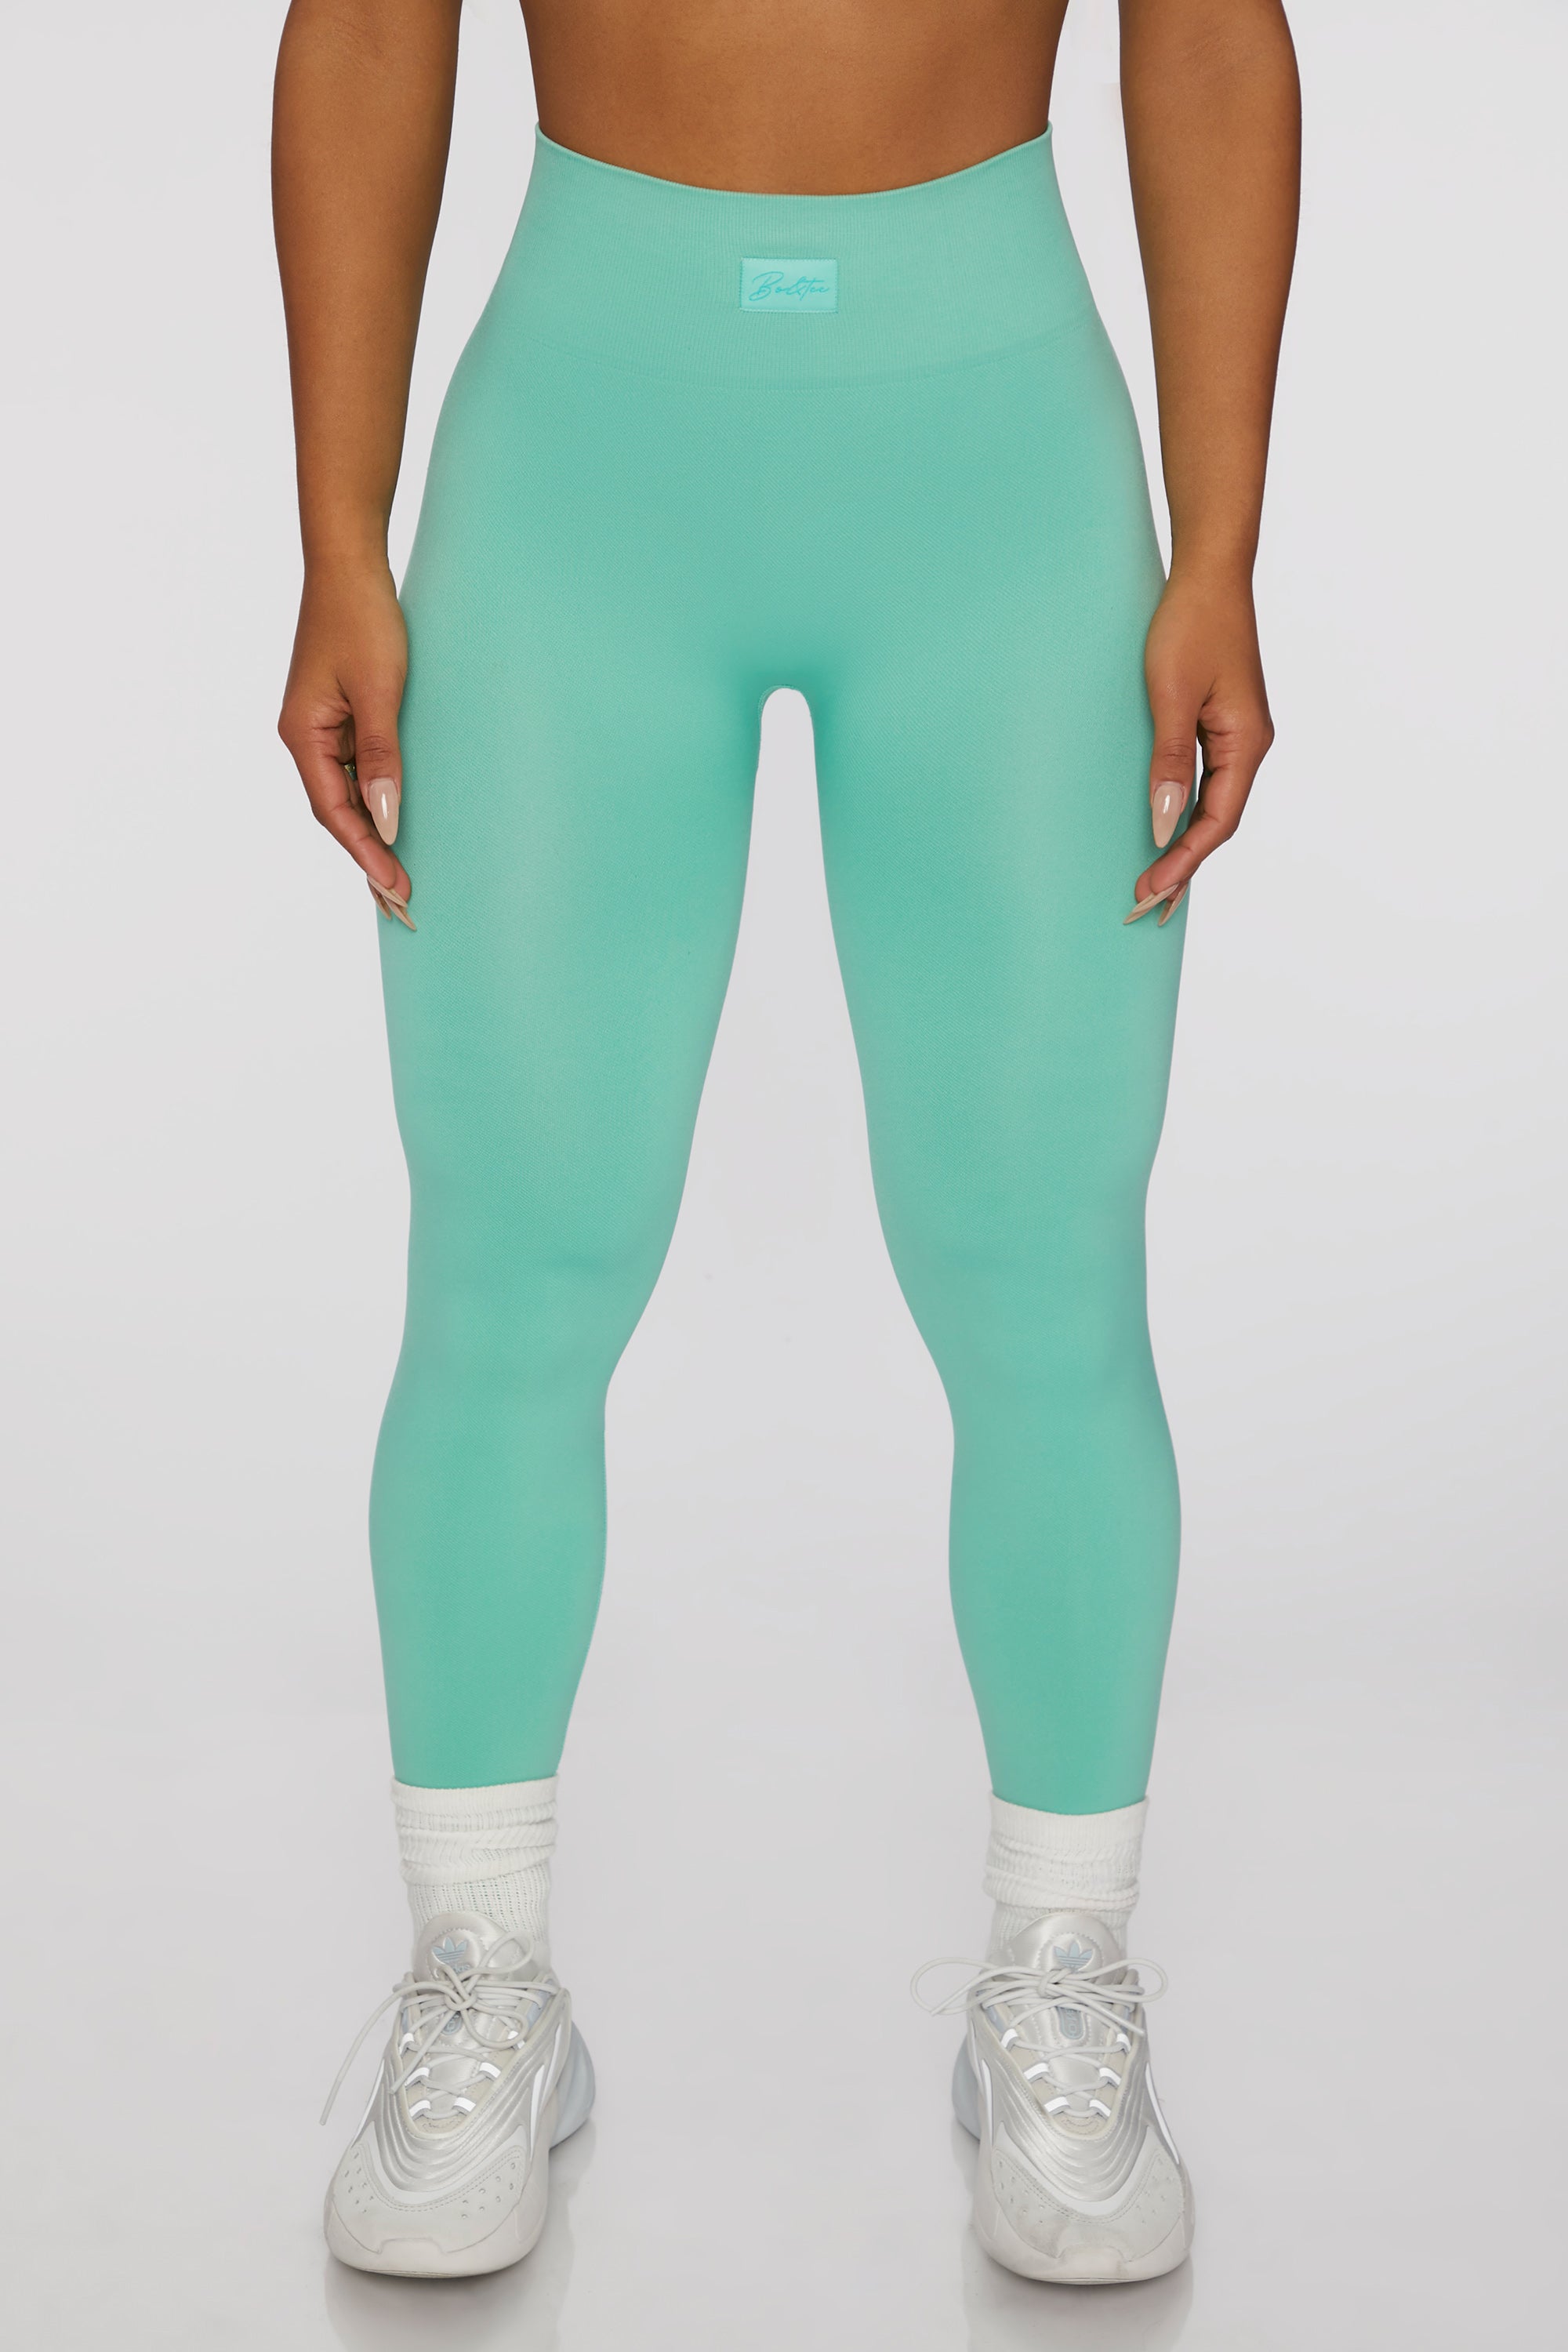 Thin Skin Leggings in Teal!! @tayione is simply perfection 🙌🏽🙌🏽🙌🏽 now  stocked! Shop now at www.poshsnob.com or clicking link in bio 💎💎 #leggings  #yoga